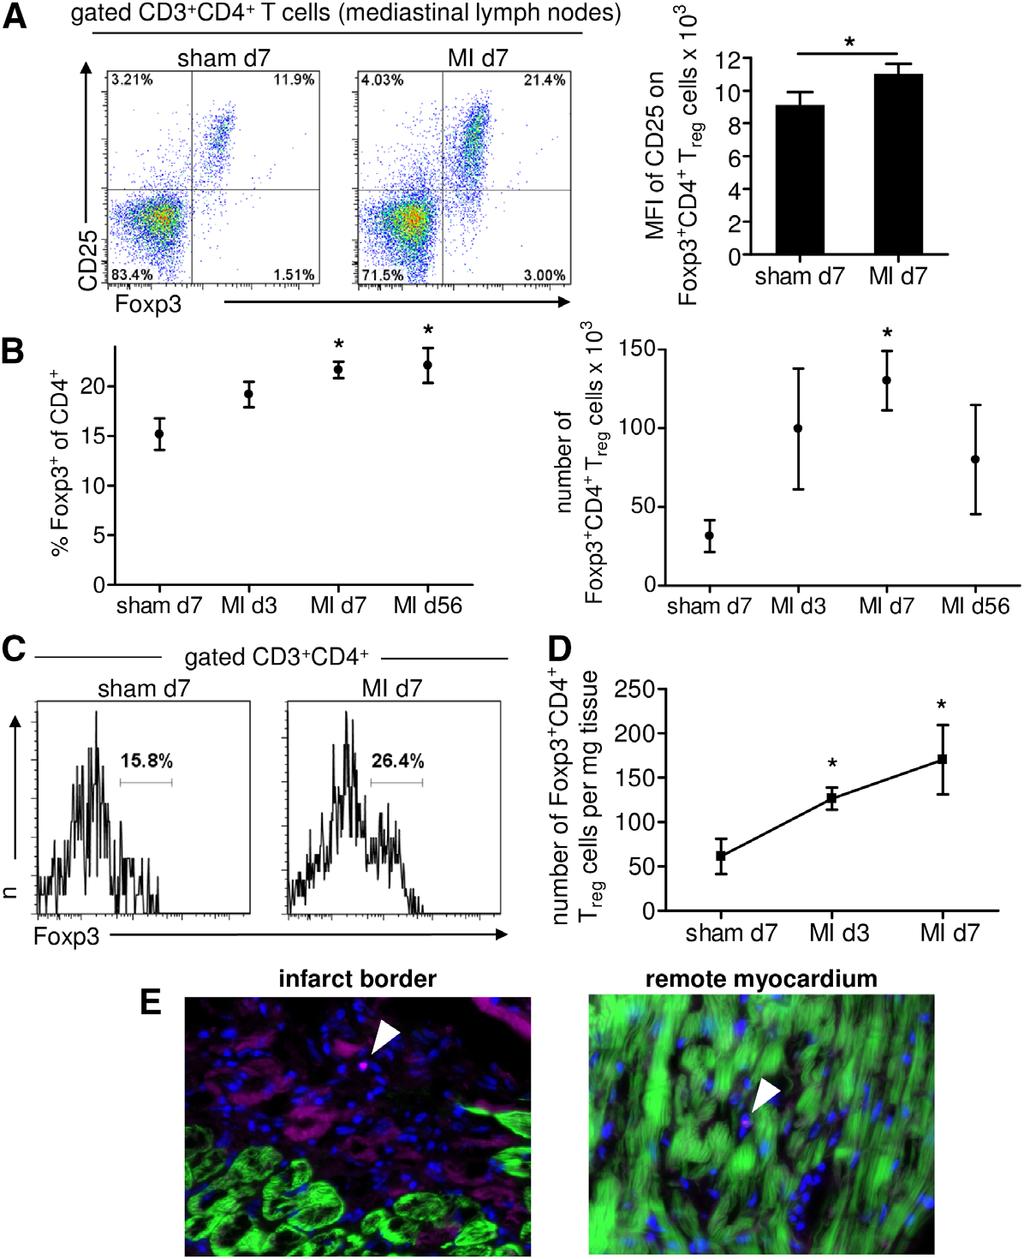 Weirather et al Cells Modulate Macrophage Differentiation Post-MI 57 Downloaded from http://circres.ahajournals.